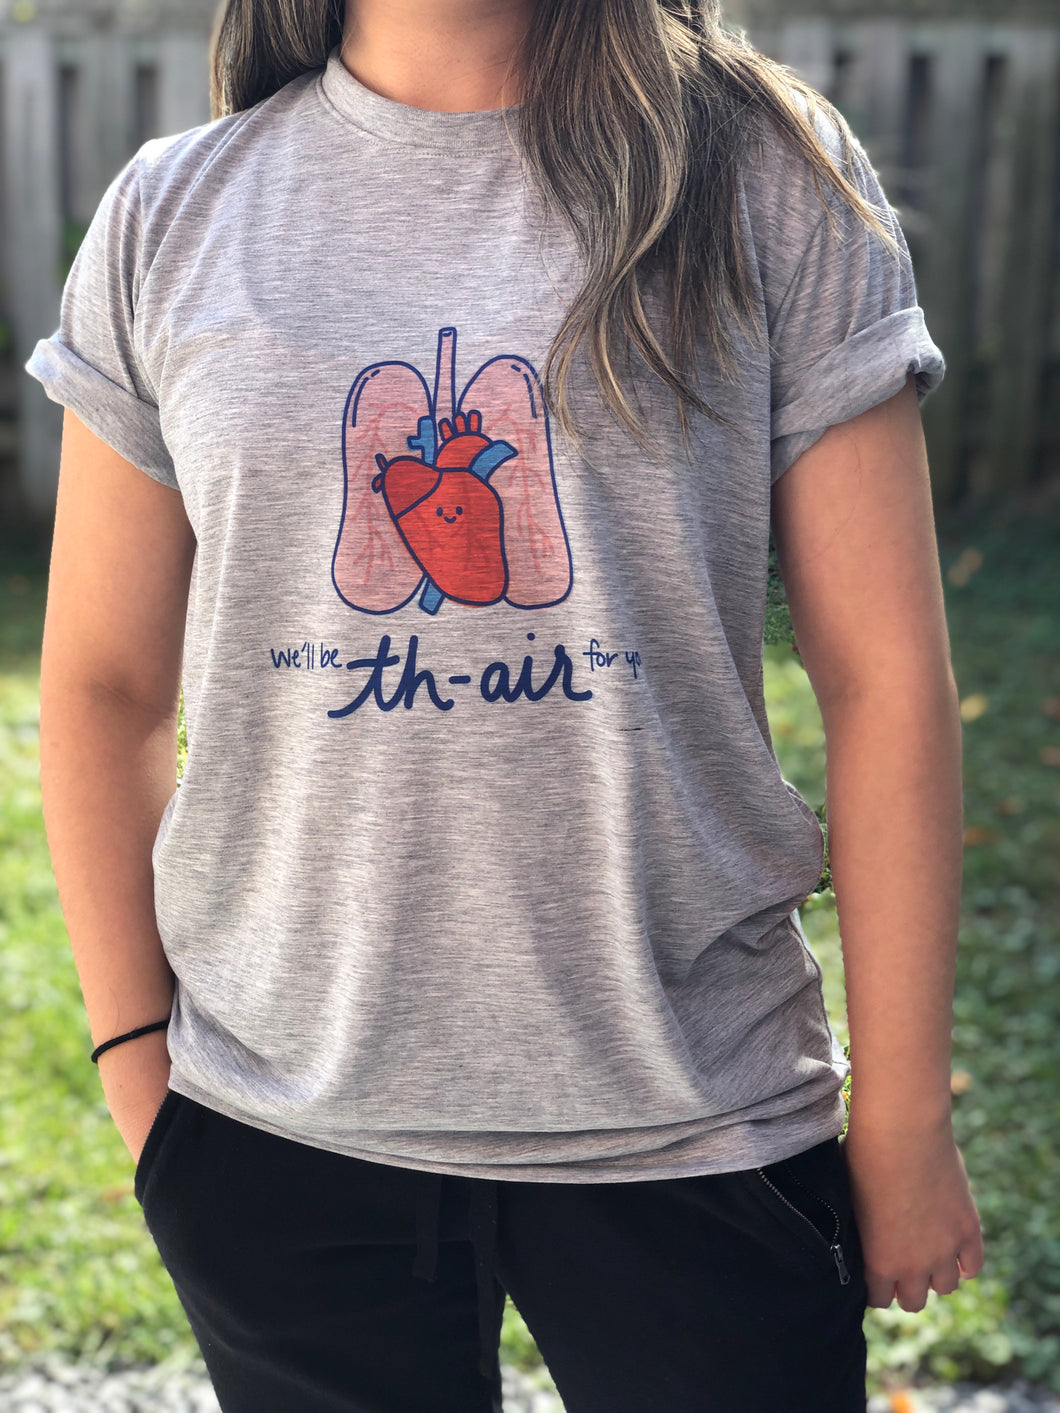 We'll be th-air for you T-Shirt